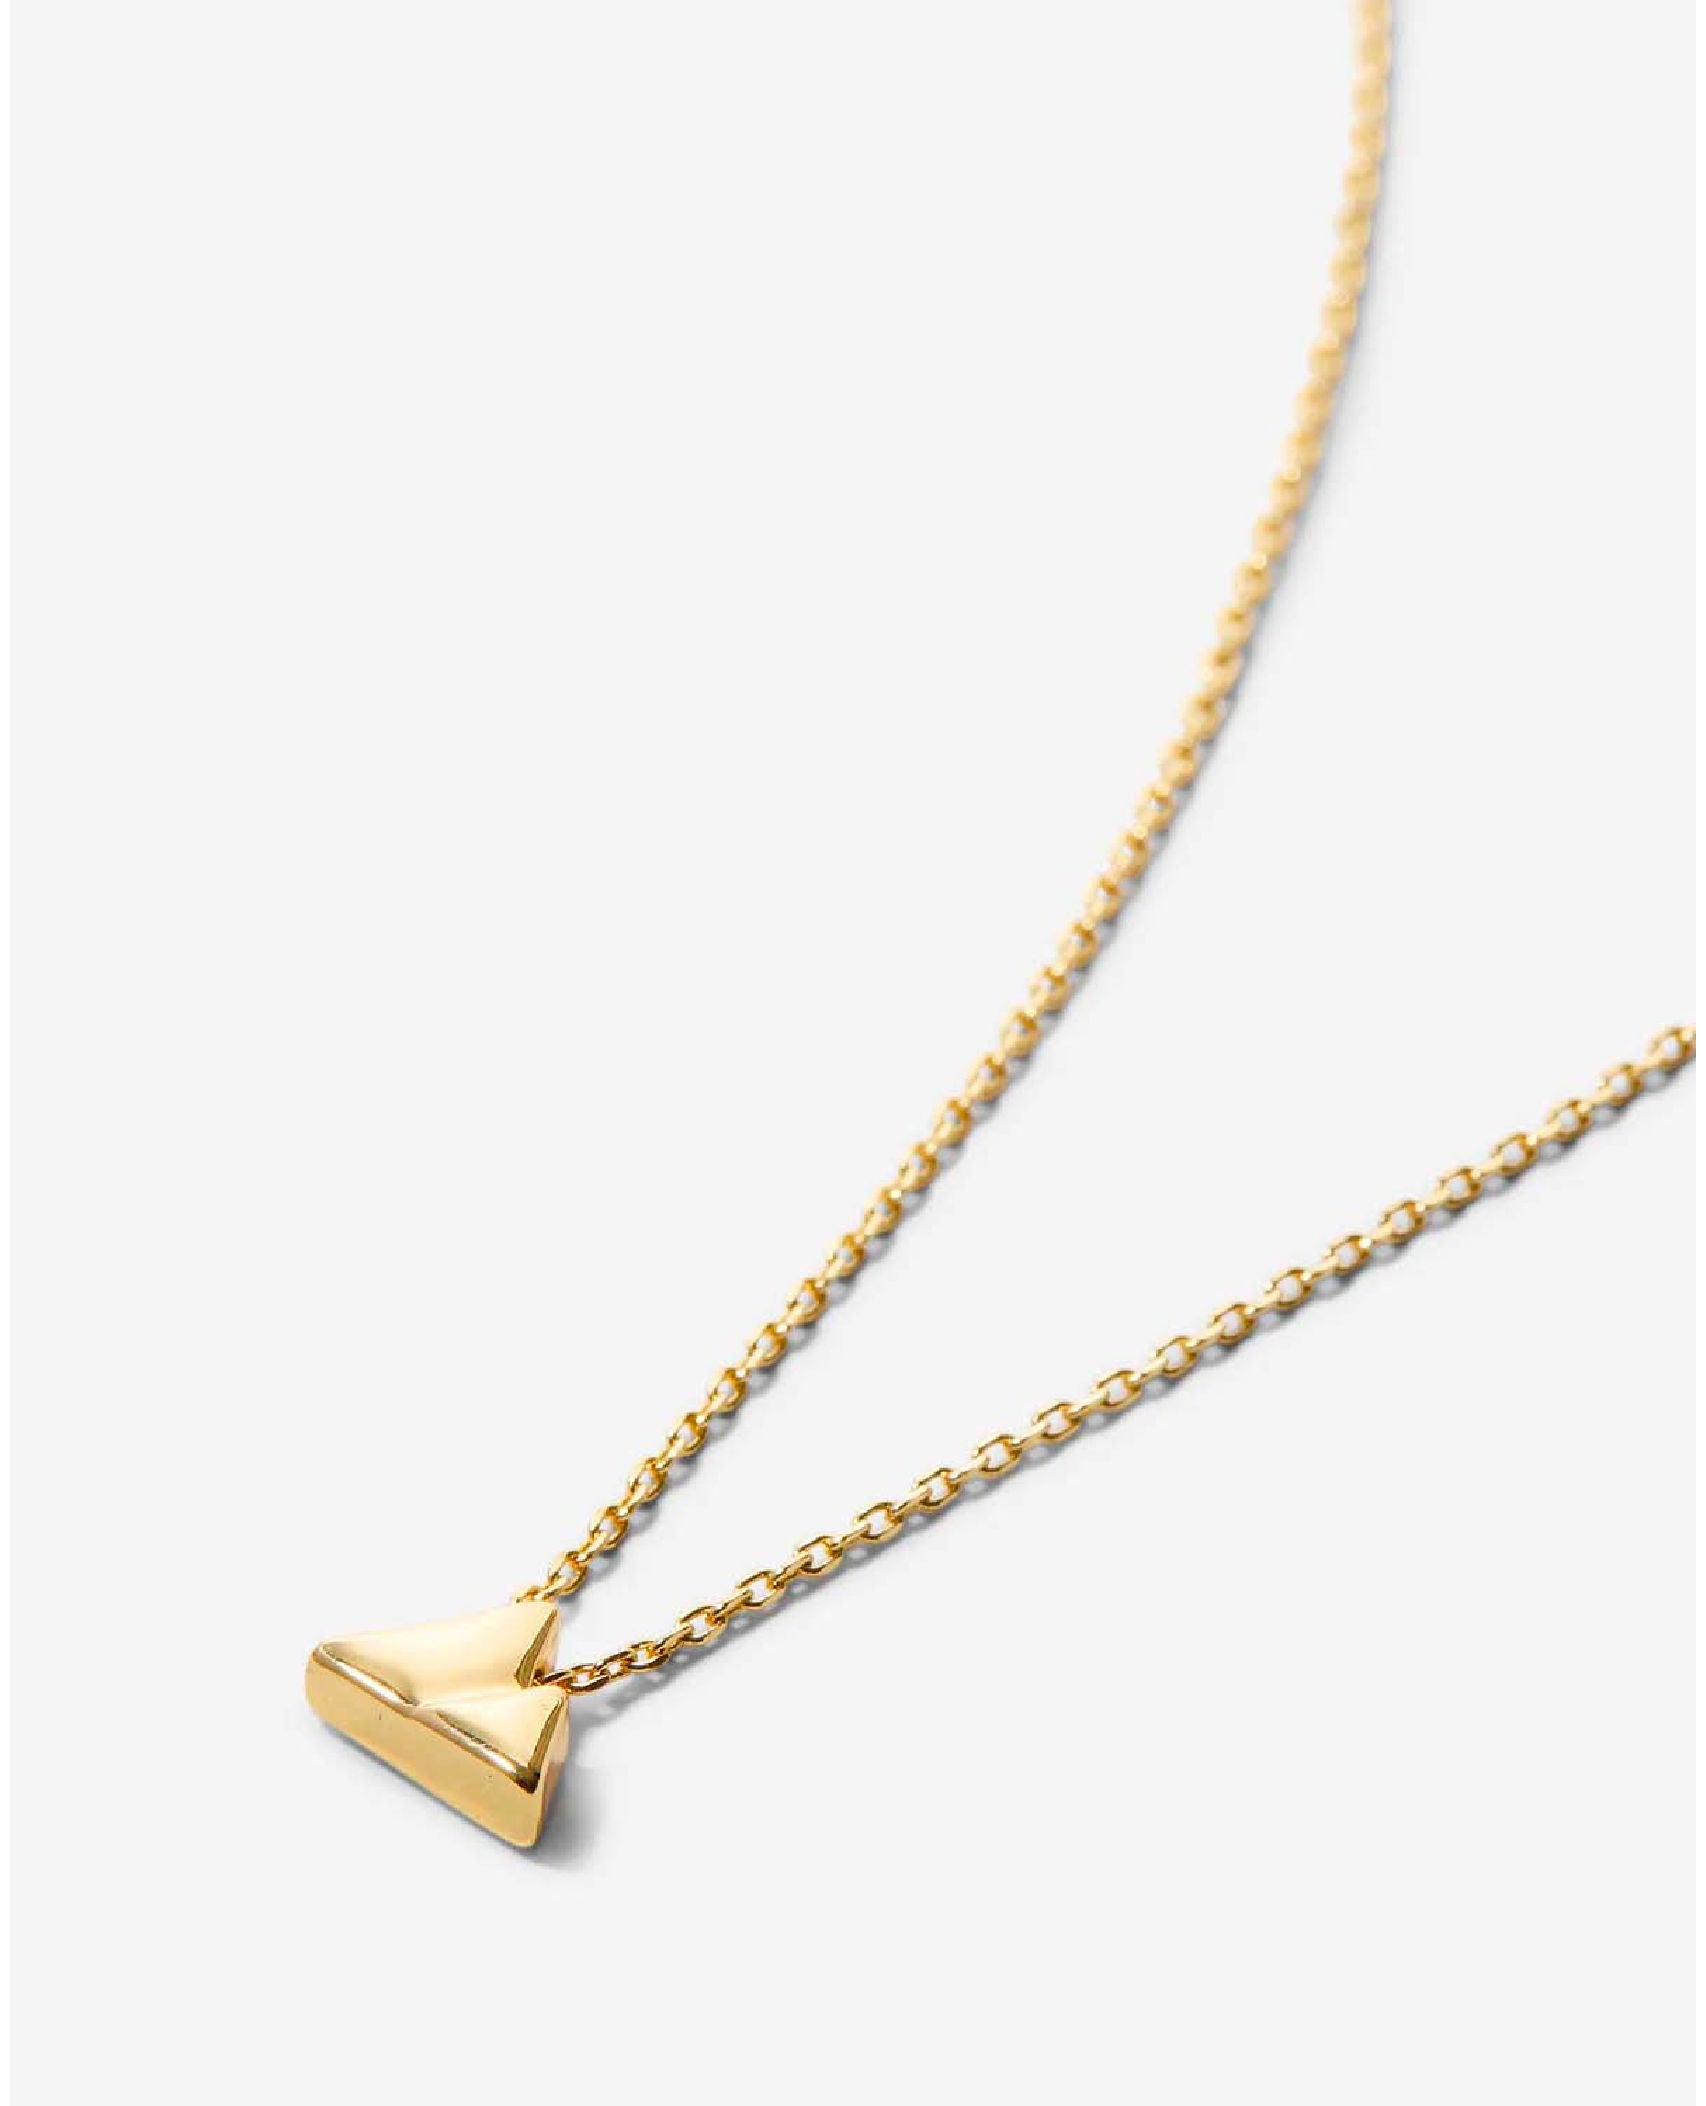 Move Mountains Necklace Gold